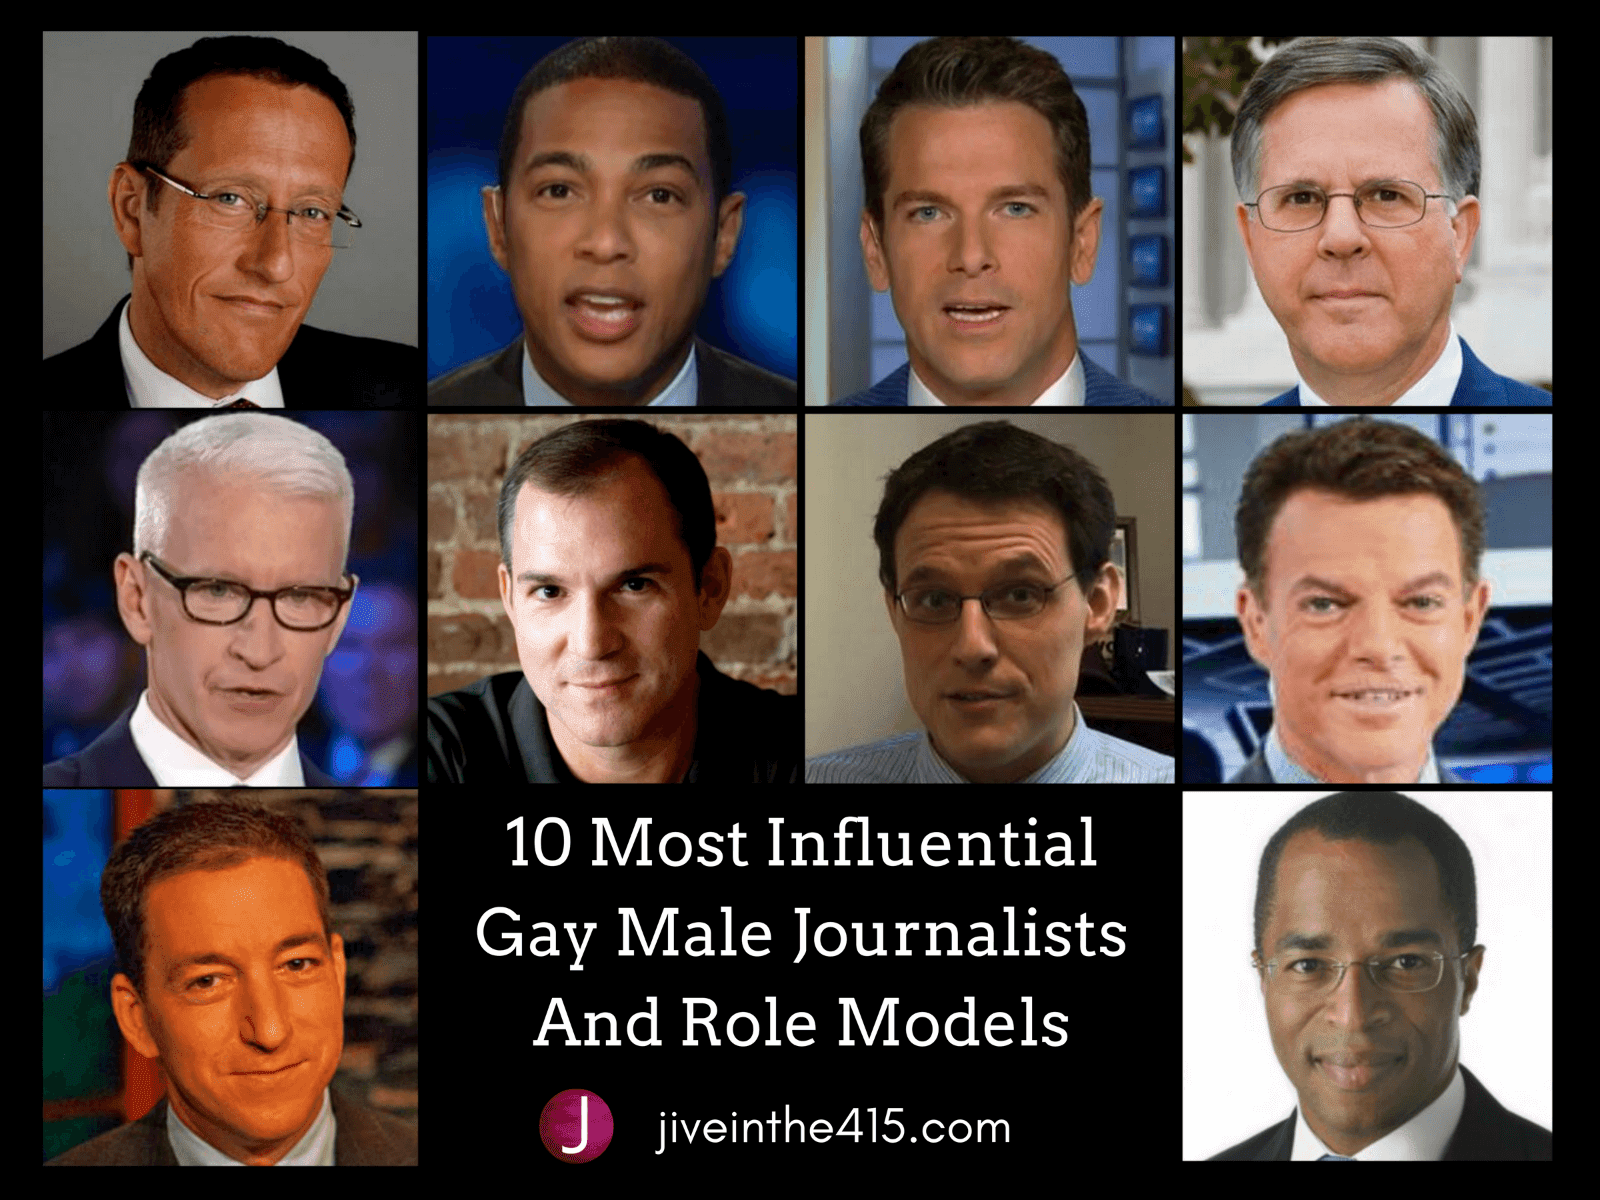 10-most-influential-gay-male-journalists-1600x1200.png